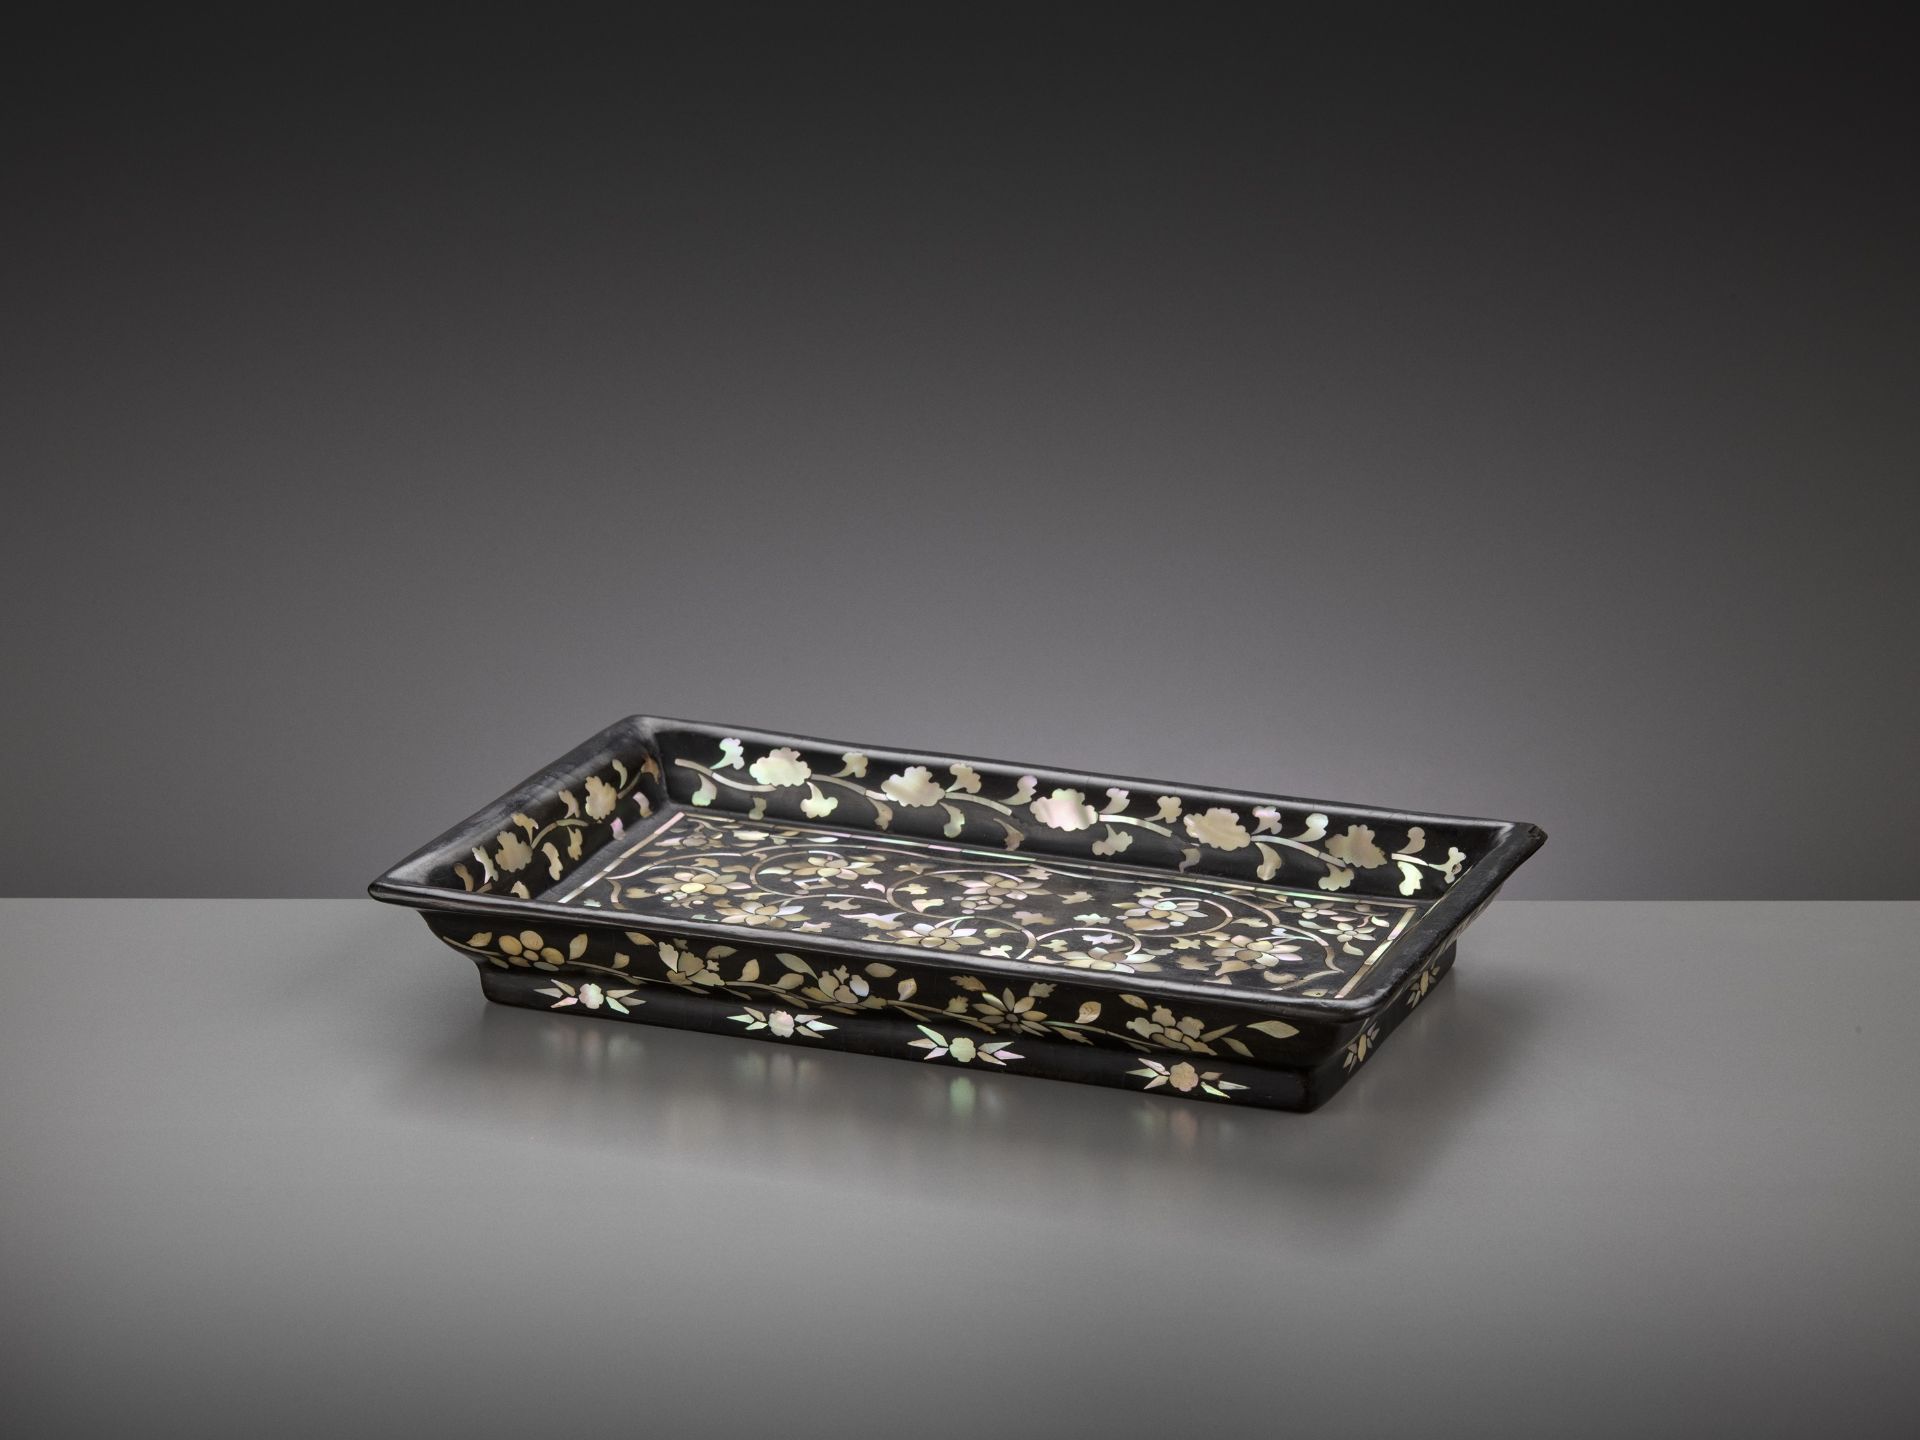 A MOTHER-OF-PEARL-INLAID BLACK LACQUER RECTANGULAR TRAY, JOSEON DYNASTY - Image 10 of 10